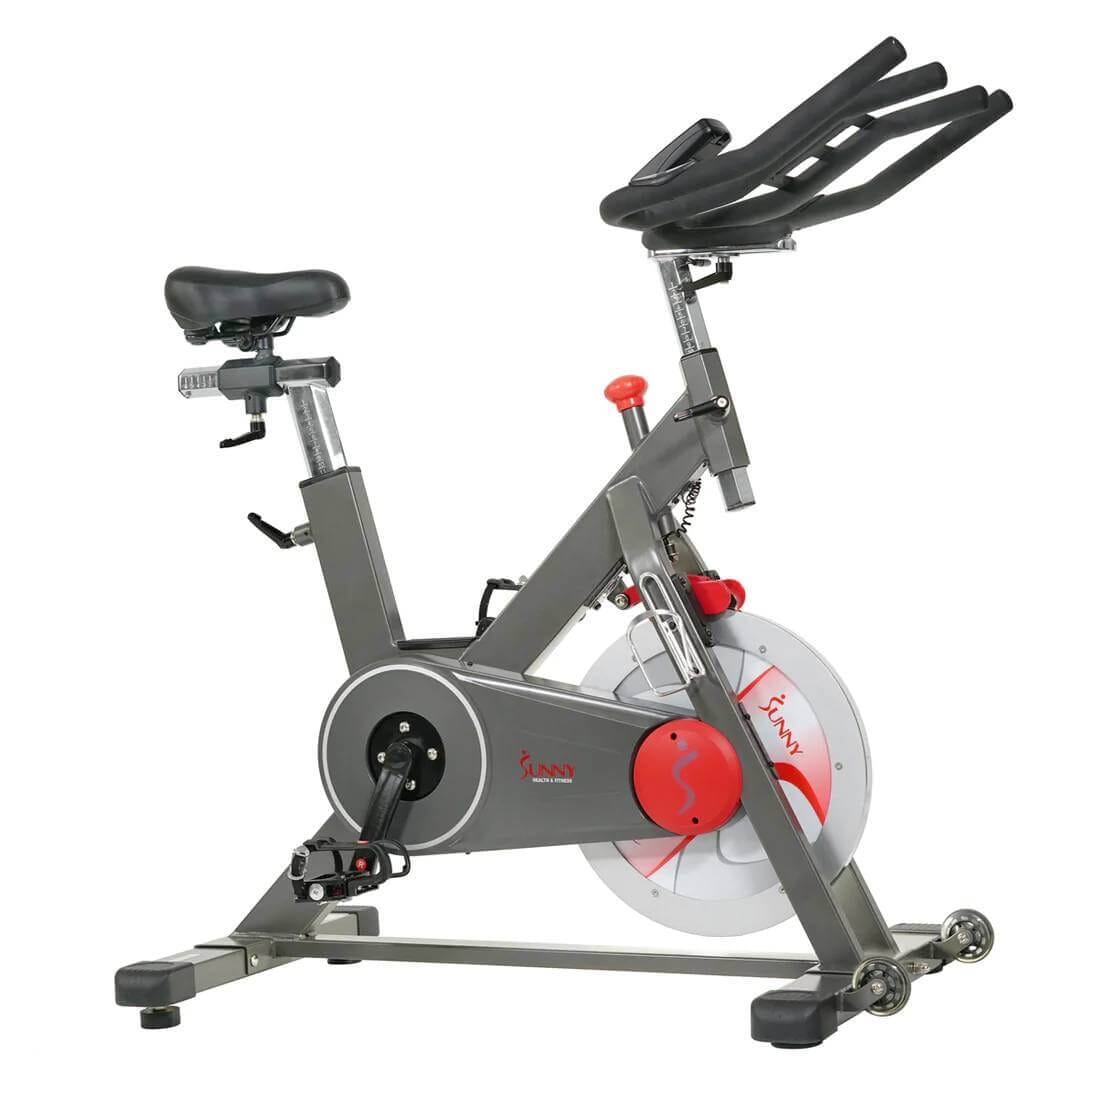 Sunny Health Fitness Adjustable Indoor Cycling Exercise Bike-Quiet